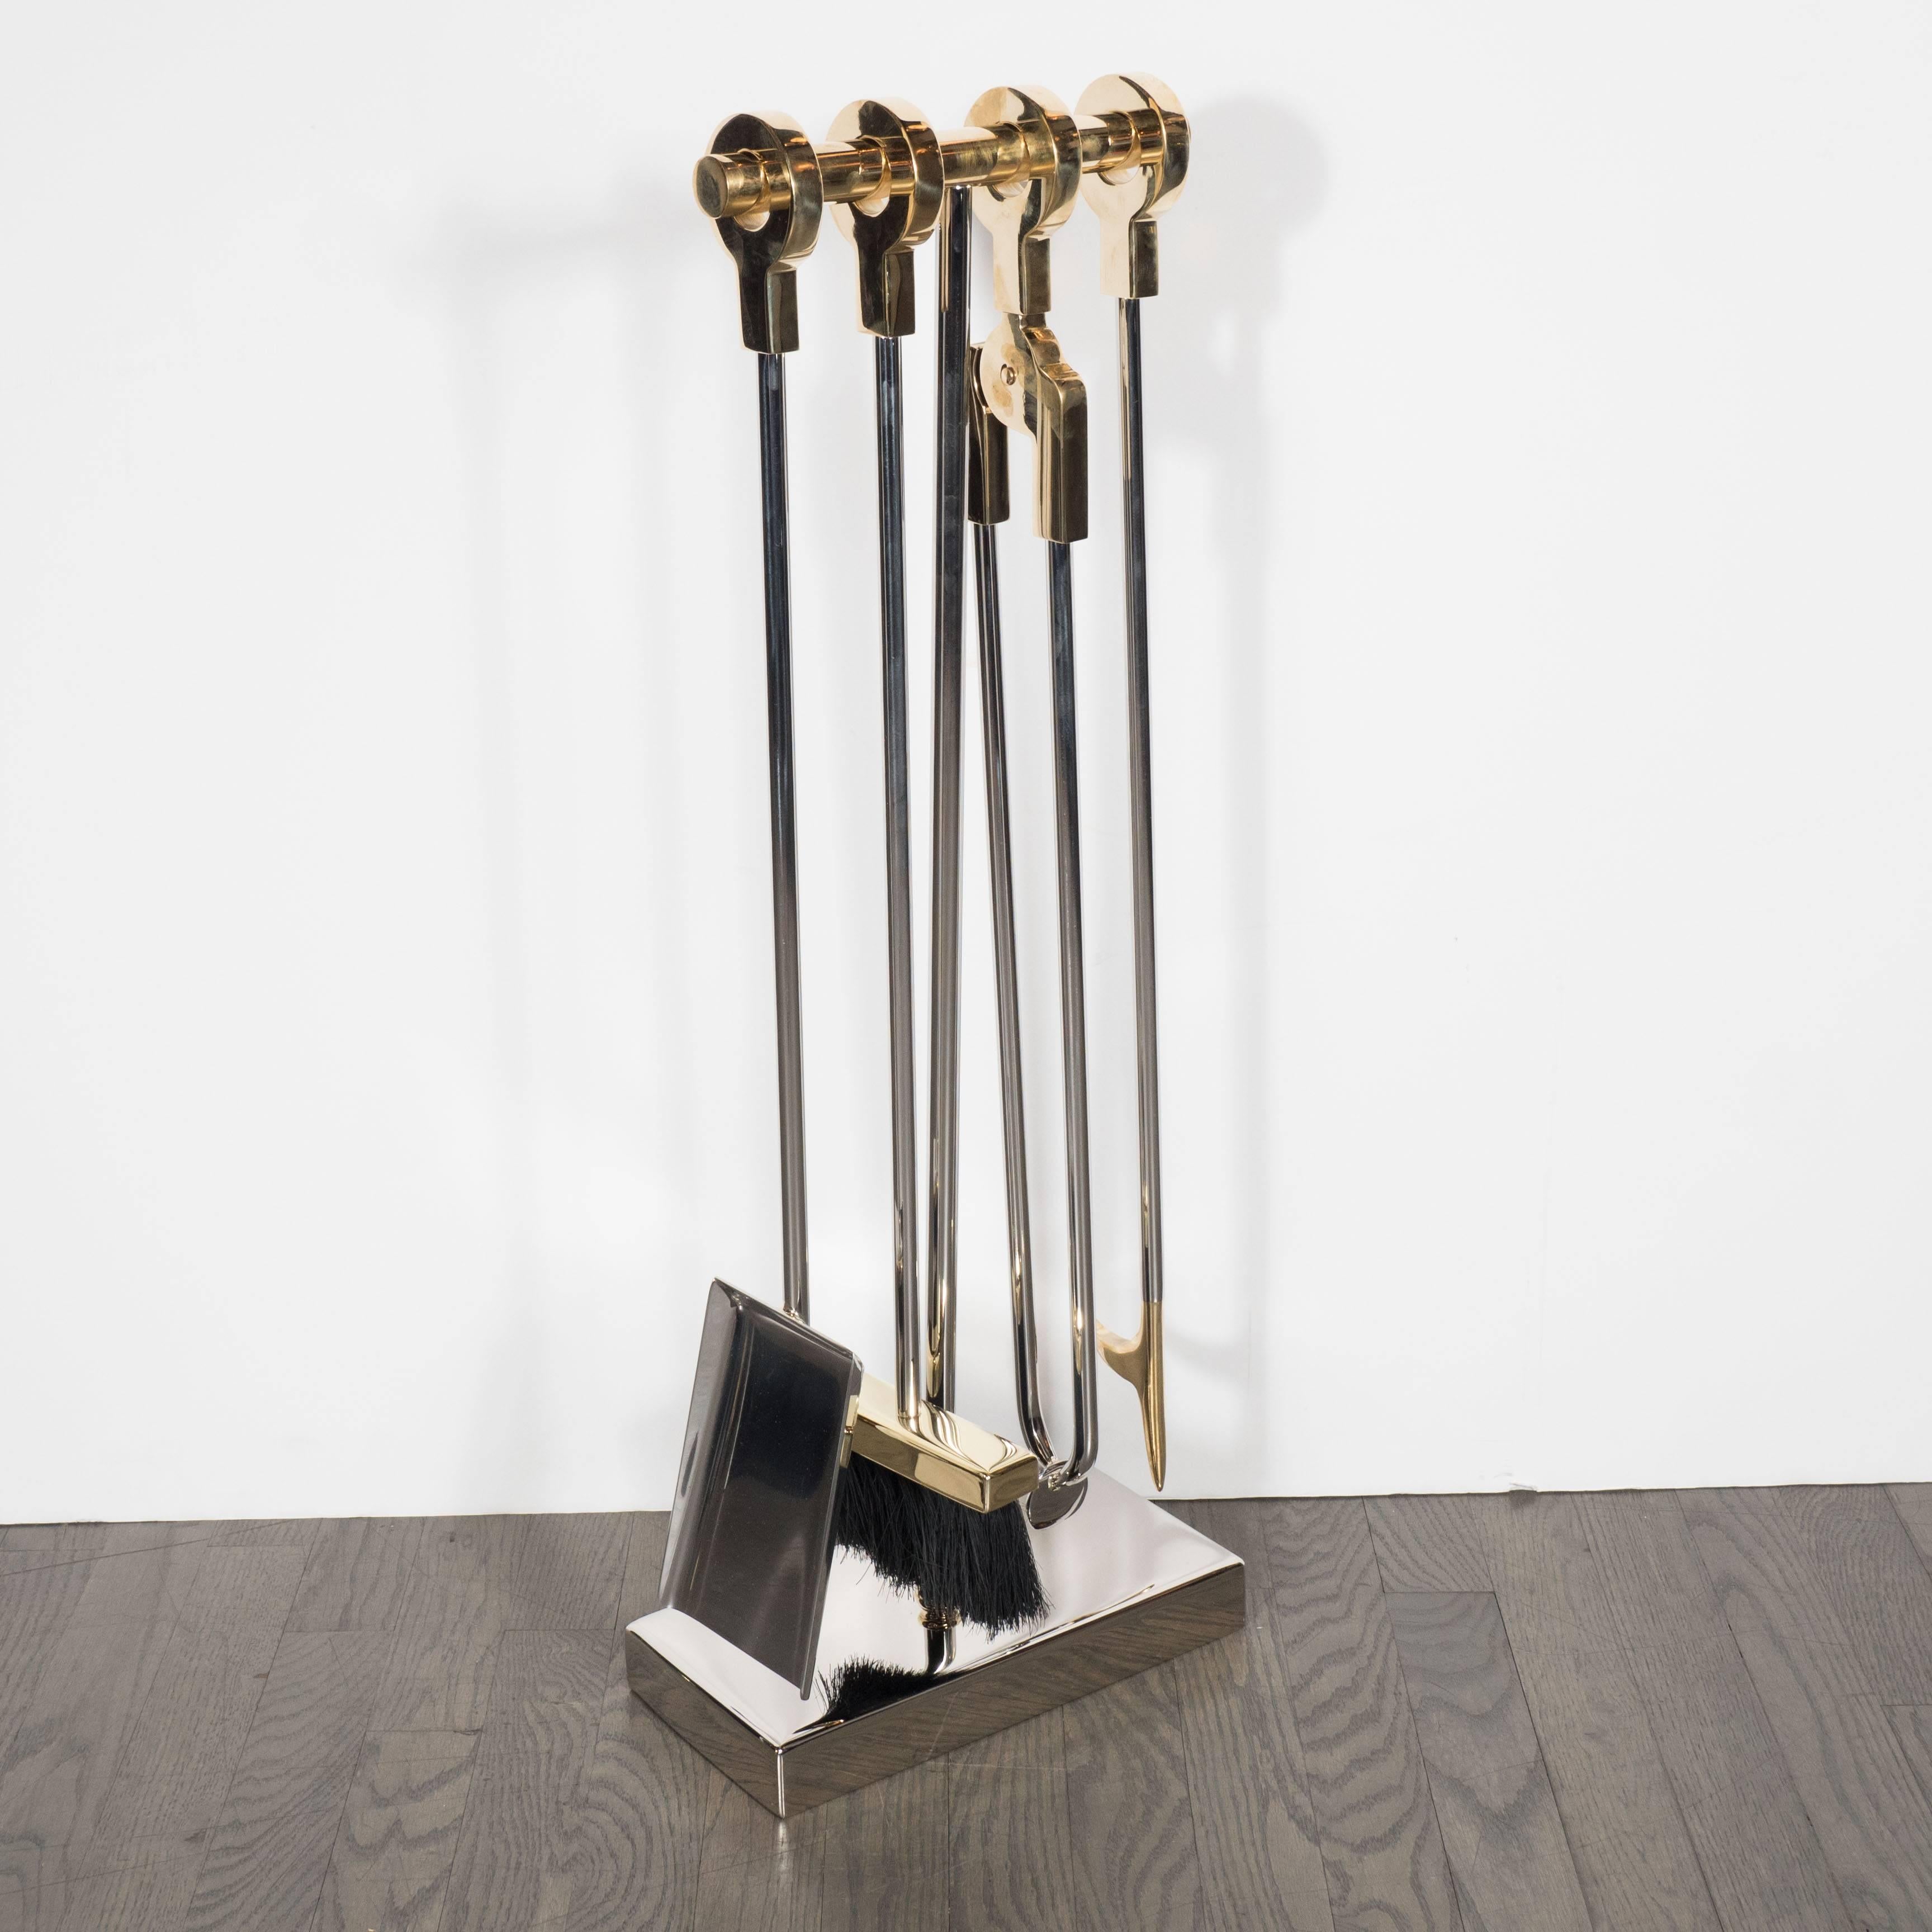 This elegant modernist four-piece fire tool set in polished nickel and polished brass was custom crafted by artisans in New York State exclusively for us. It features rectangular solid polished nickel base and central rod is topped with a polished